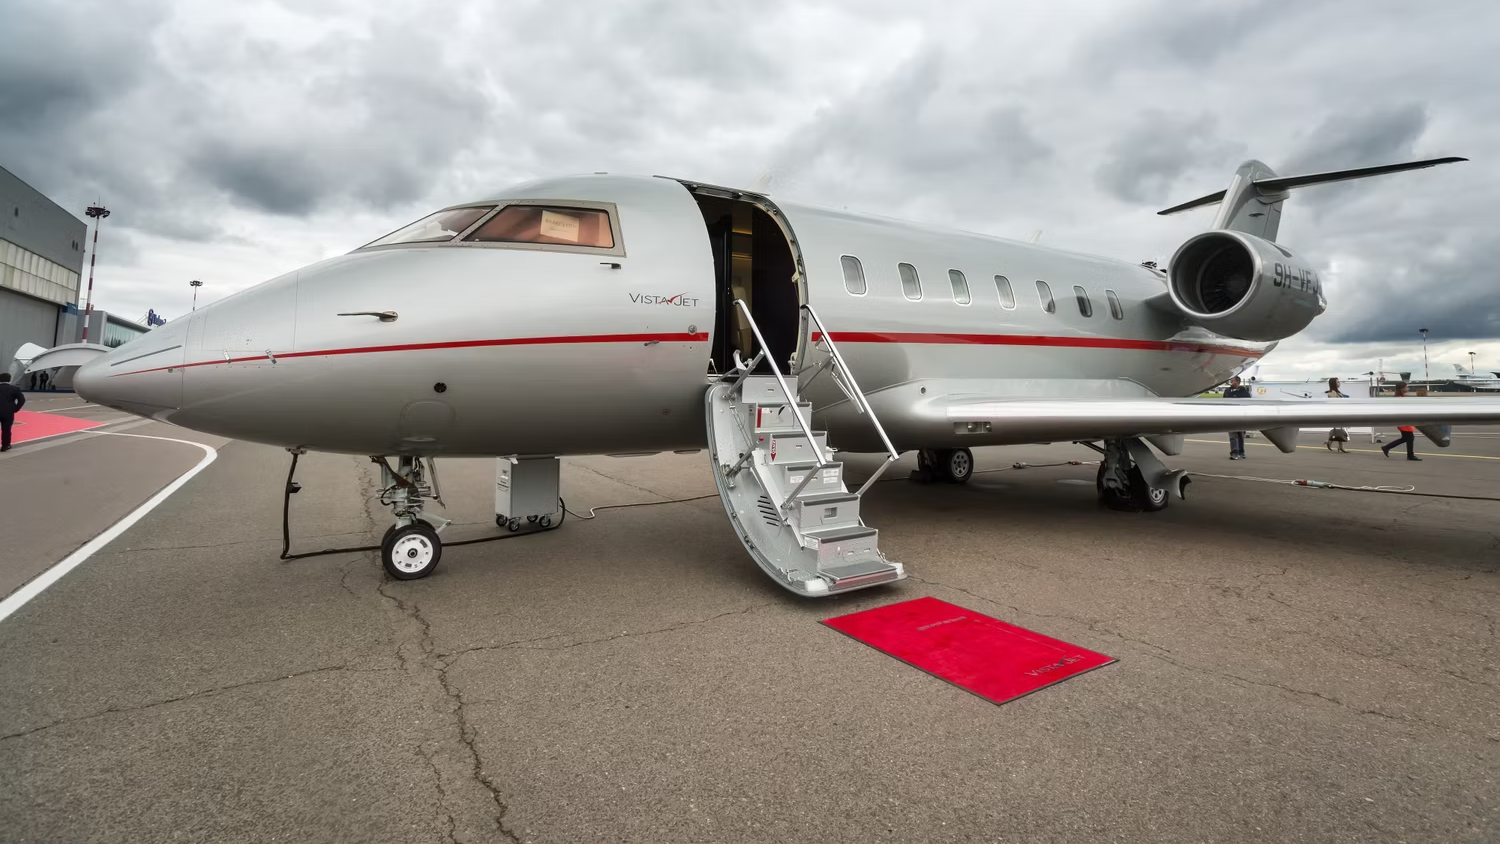 A VistaJet Bombardier Challenger Parked on an airport apron, with a red carpet leading to the aircraft stairs.